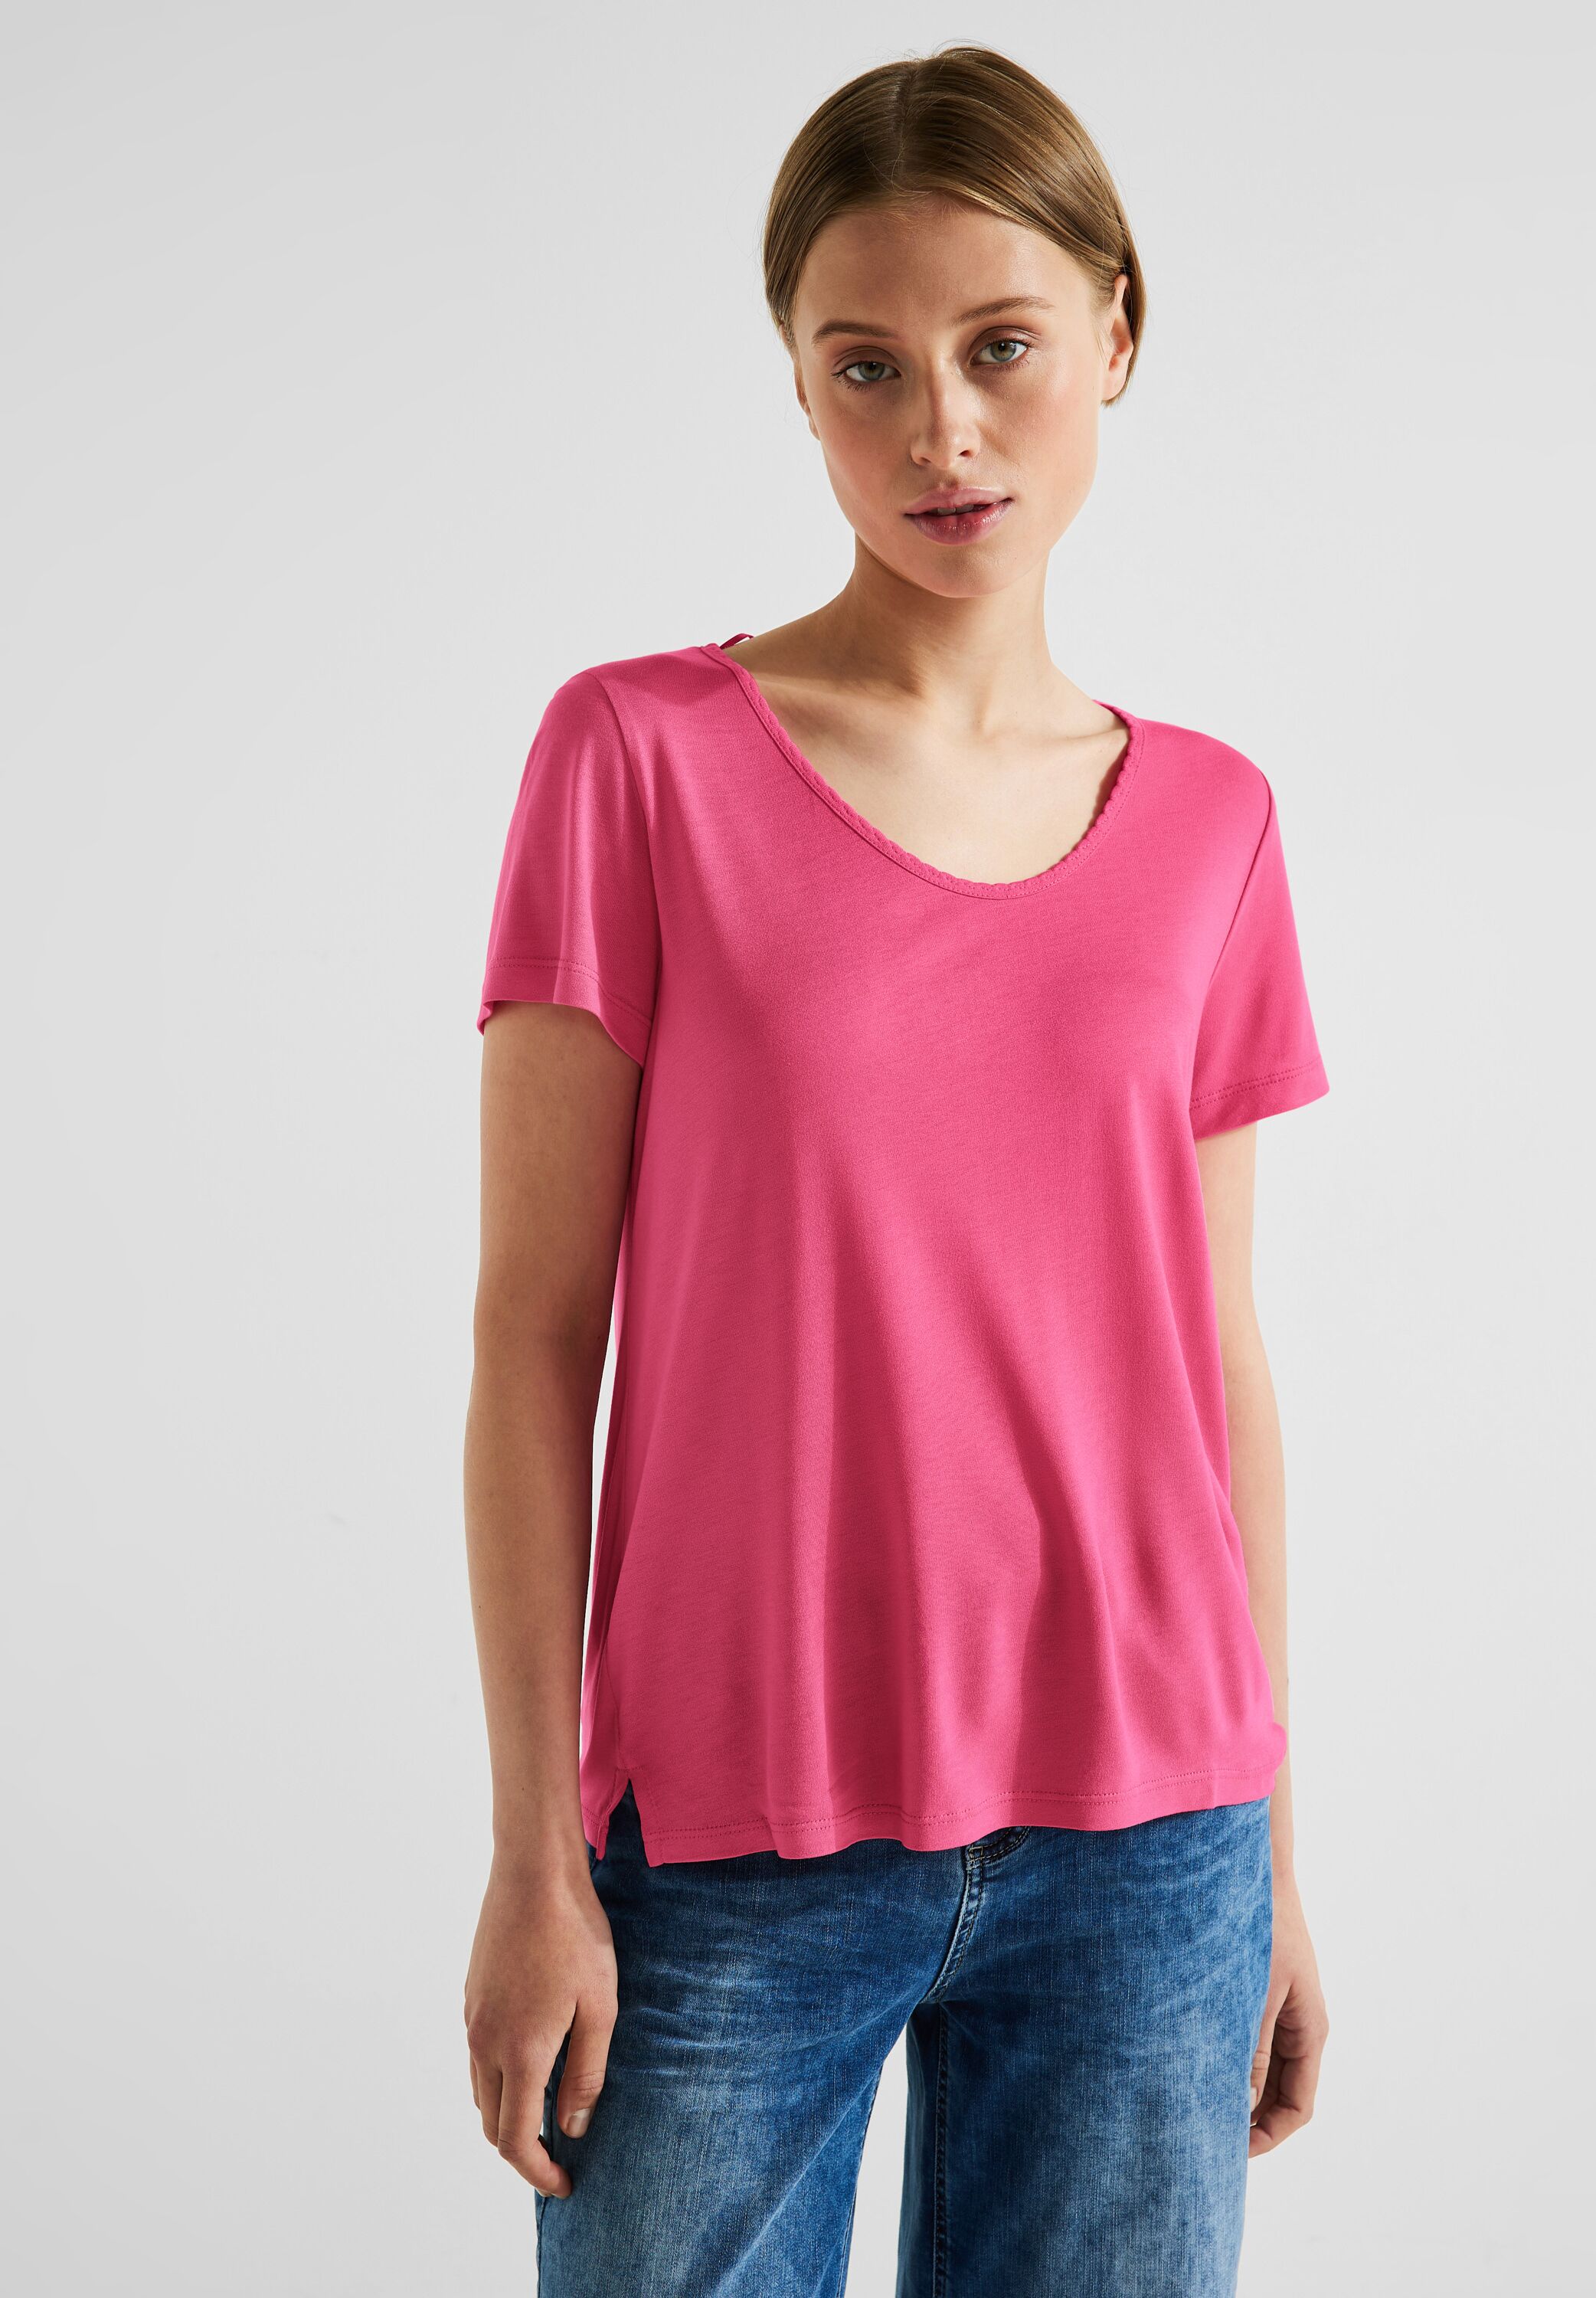 Street One T-Shirt in A320124-14647 Rose Mode SALE - CONCEPT reduziert Berry im